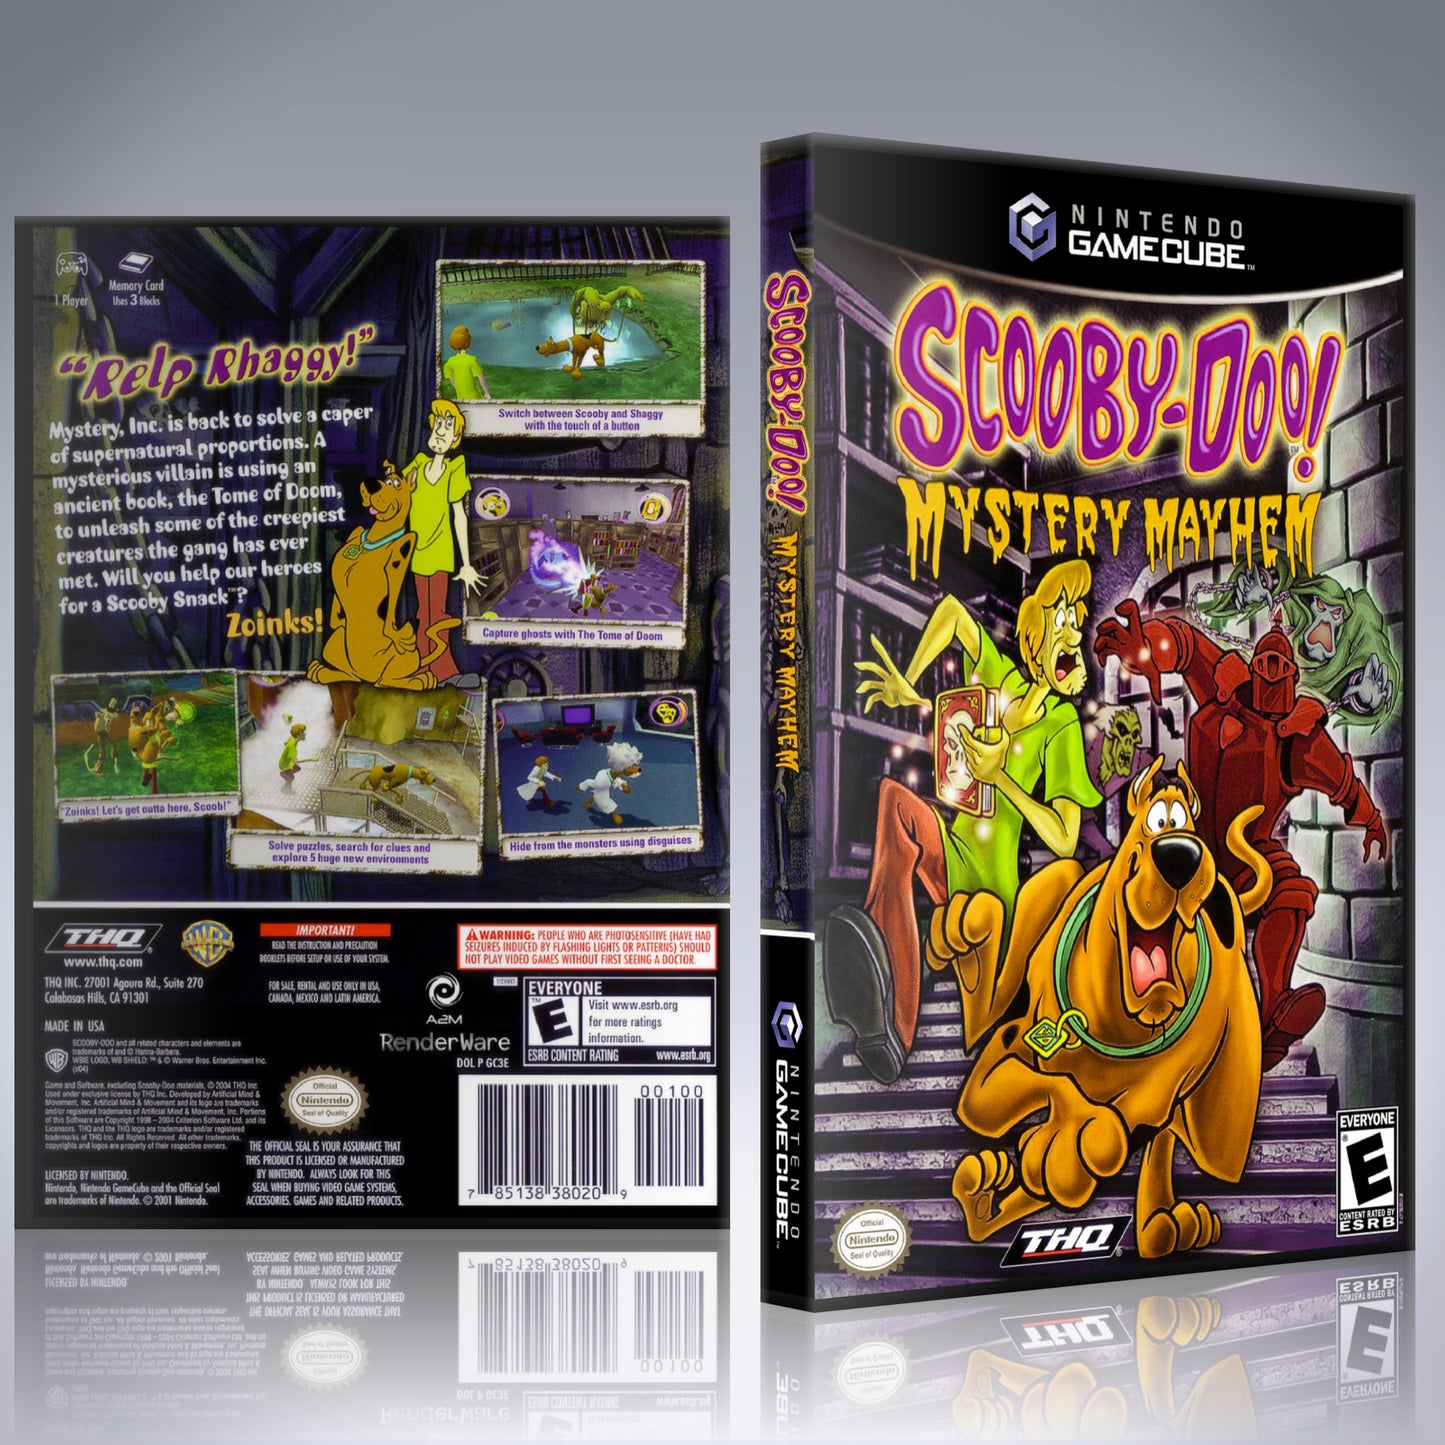 GameCube Replacement Case - NO GAME - Scooby Doo - Mystery Mayhem